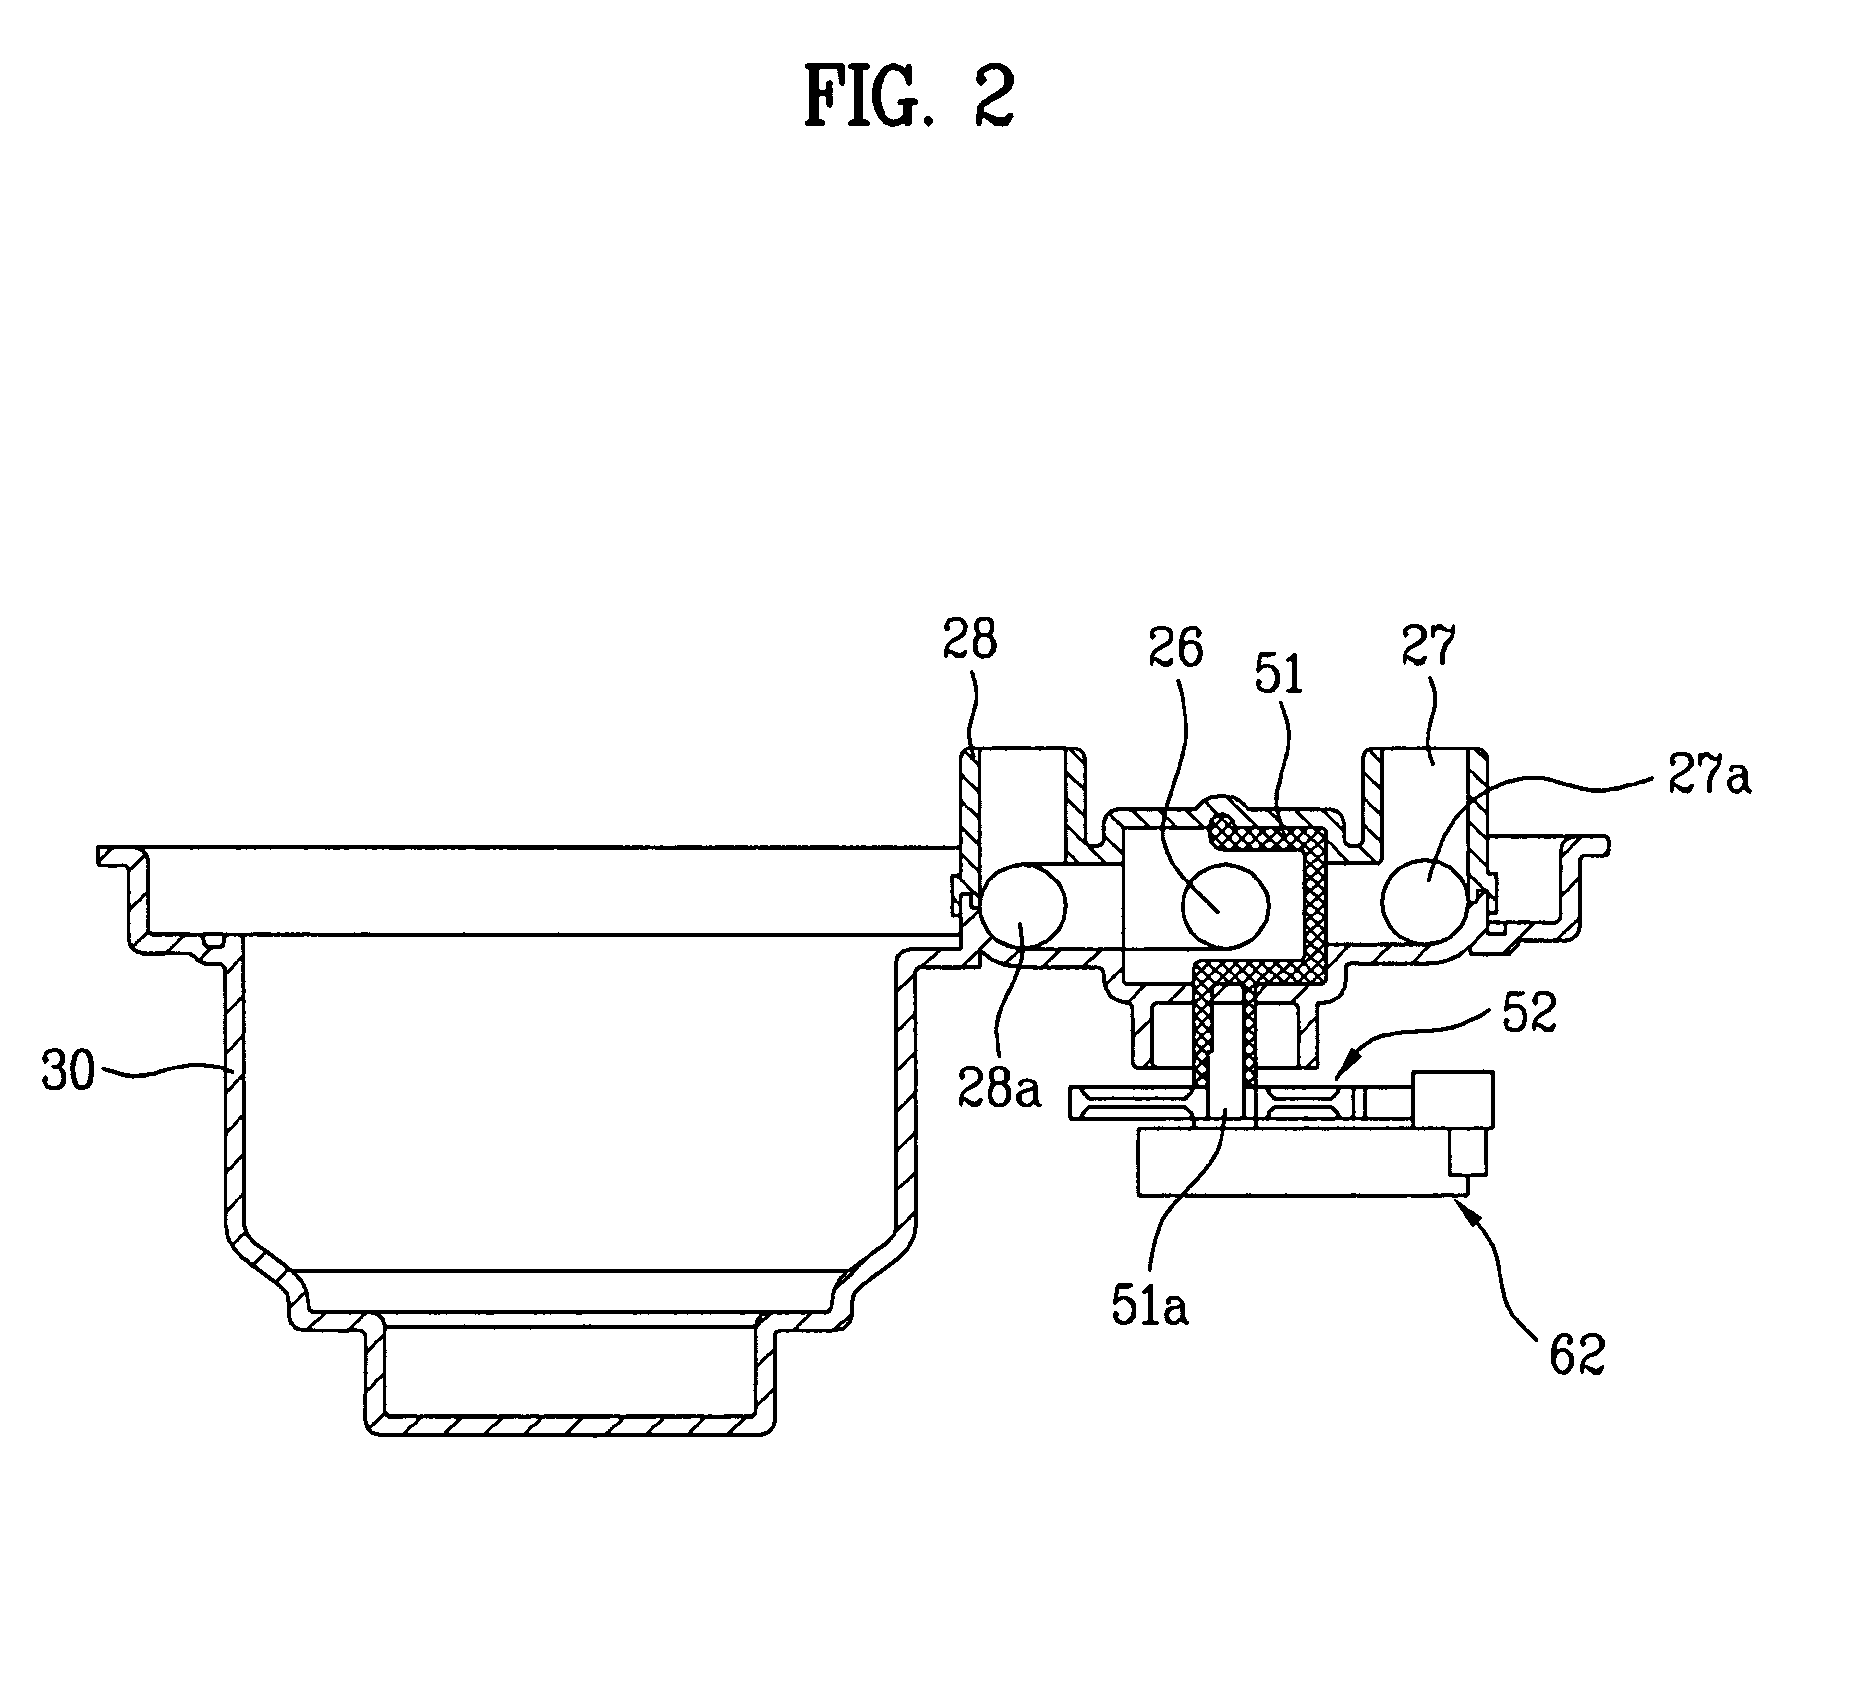 Dishwasher and controlling method thereof